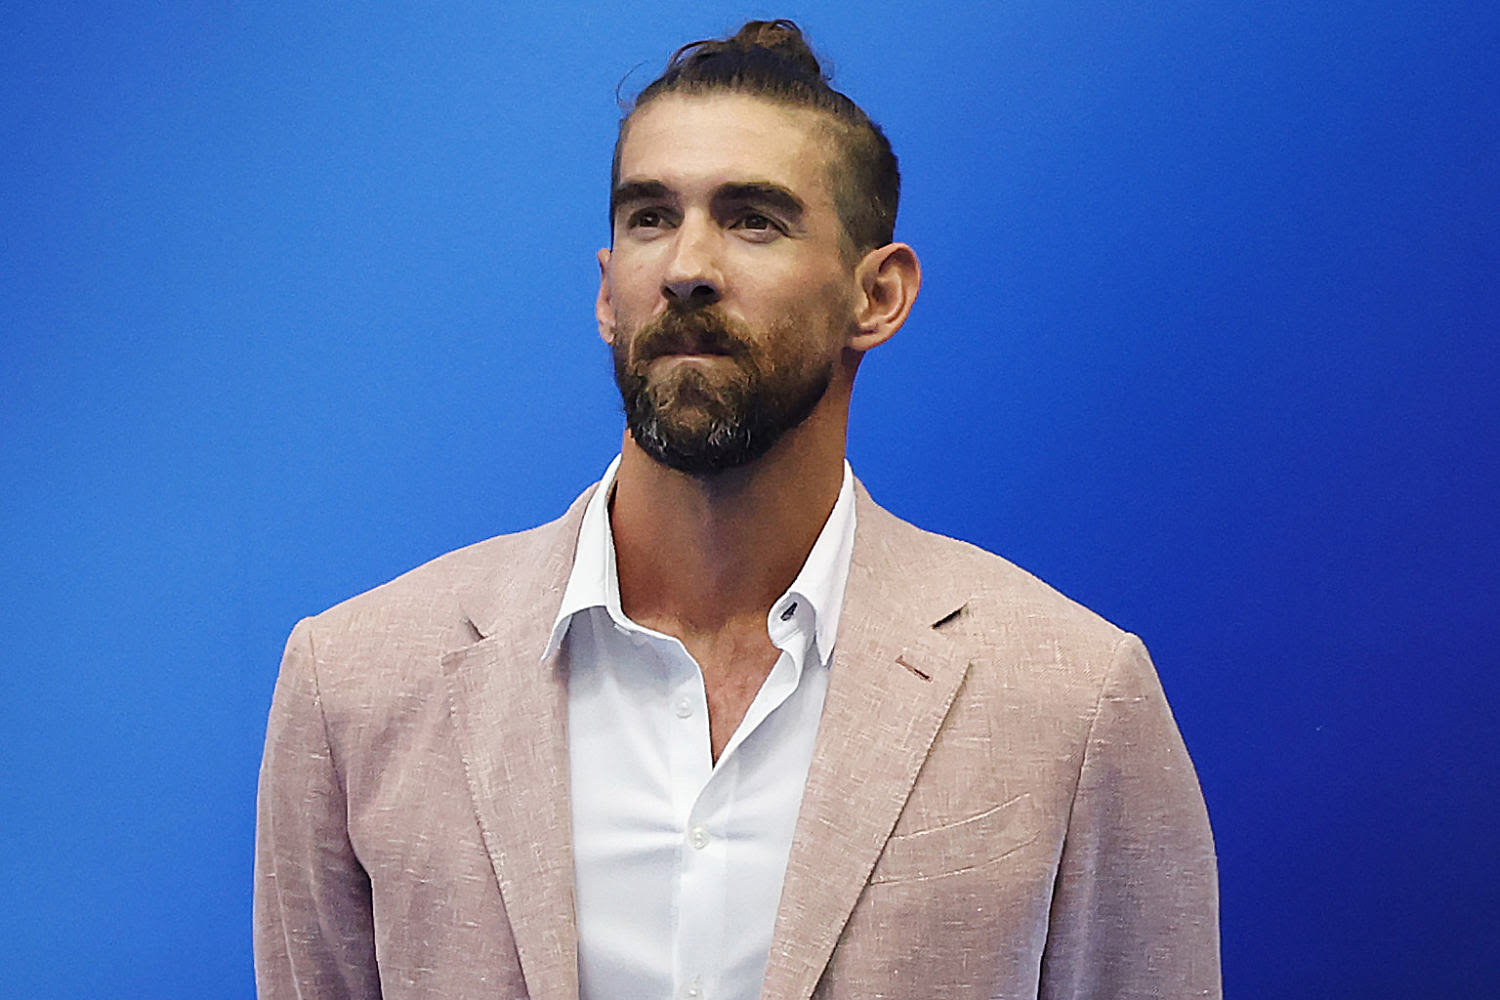 Michael Phelps to testify about anti-doping measures in swimming ahead of Paris Olympics